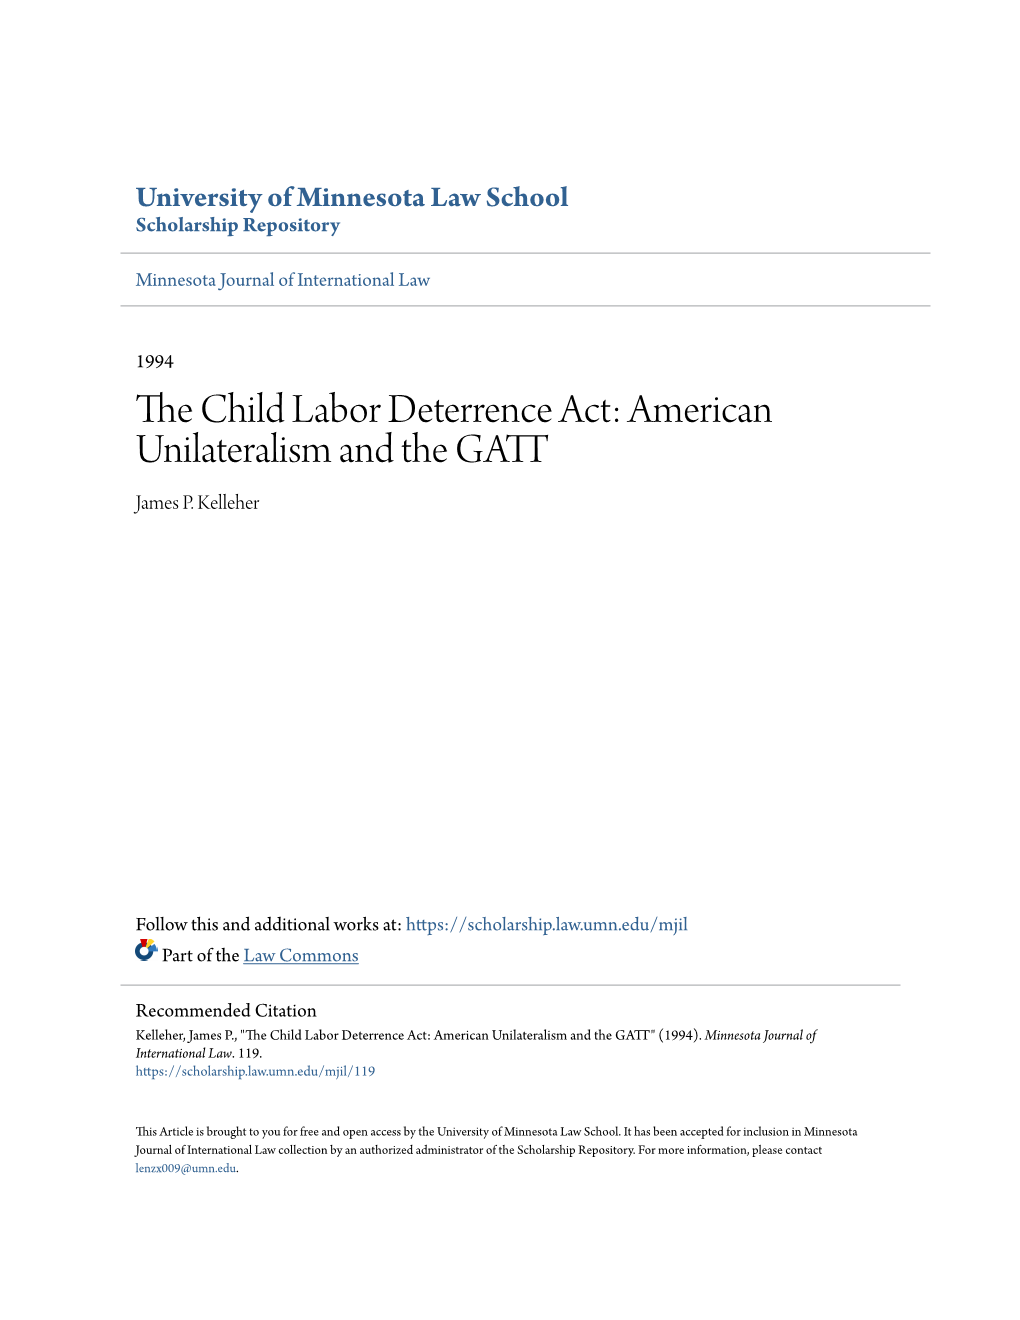 The Child Labor Deterrence Act: American Unilateralism and the GATT